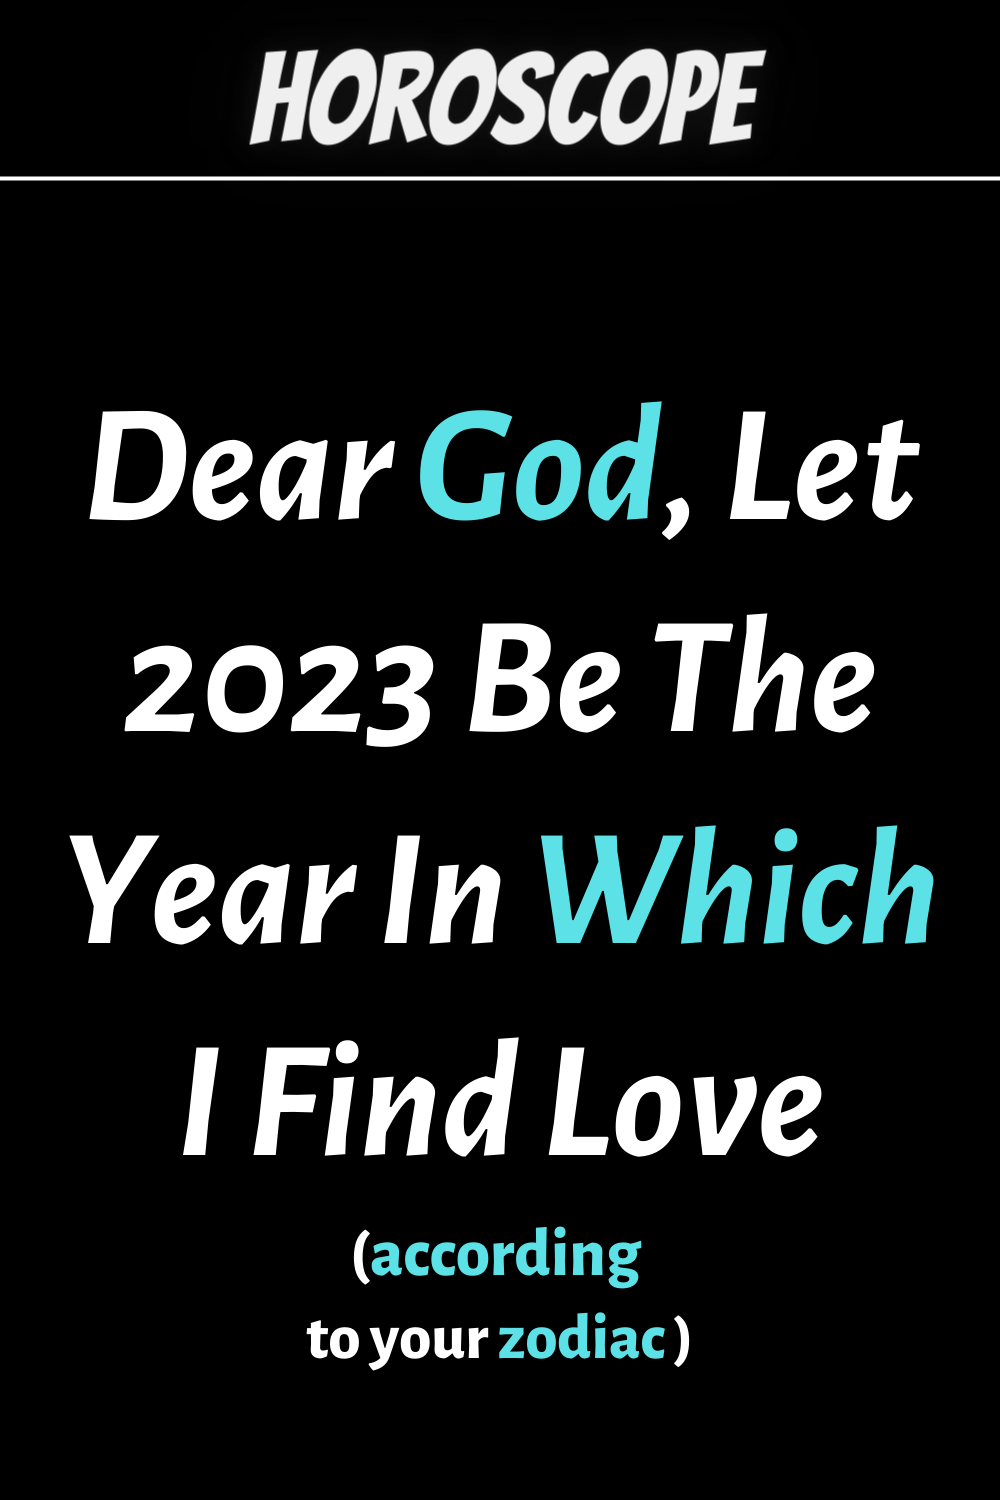 Dear God, Let 2023 Be The Year In Which I Find Love